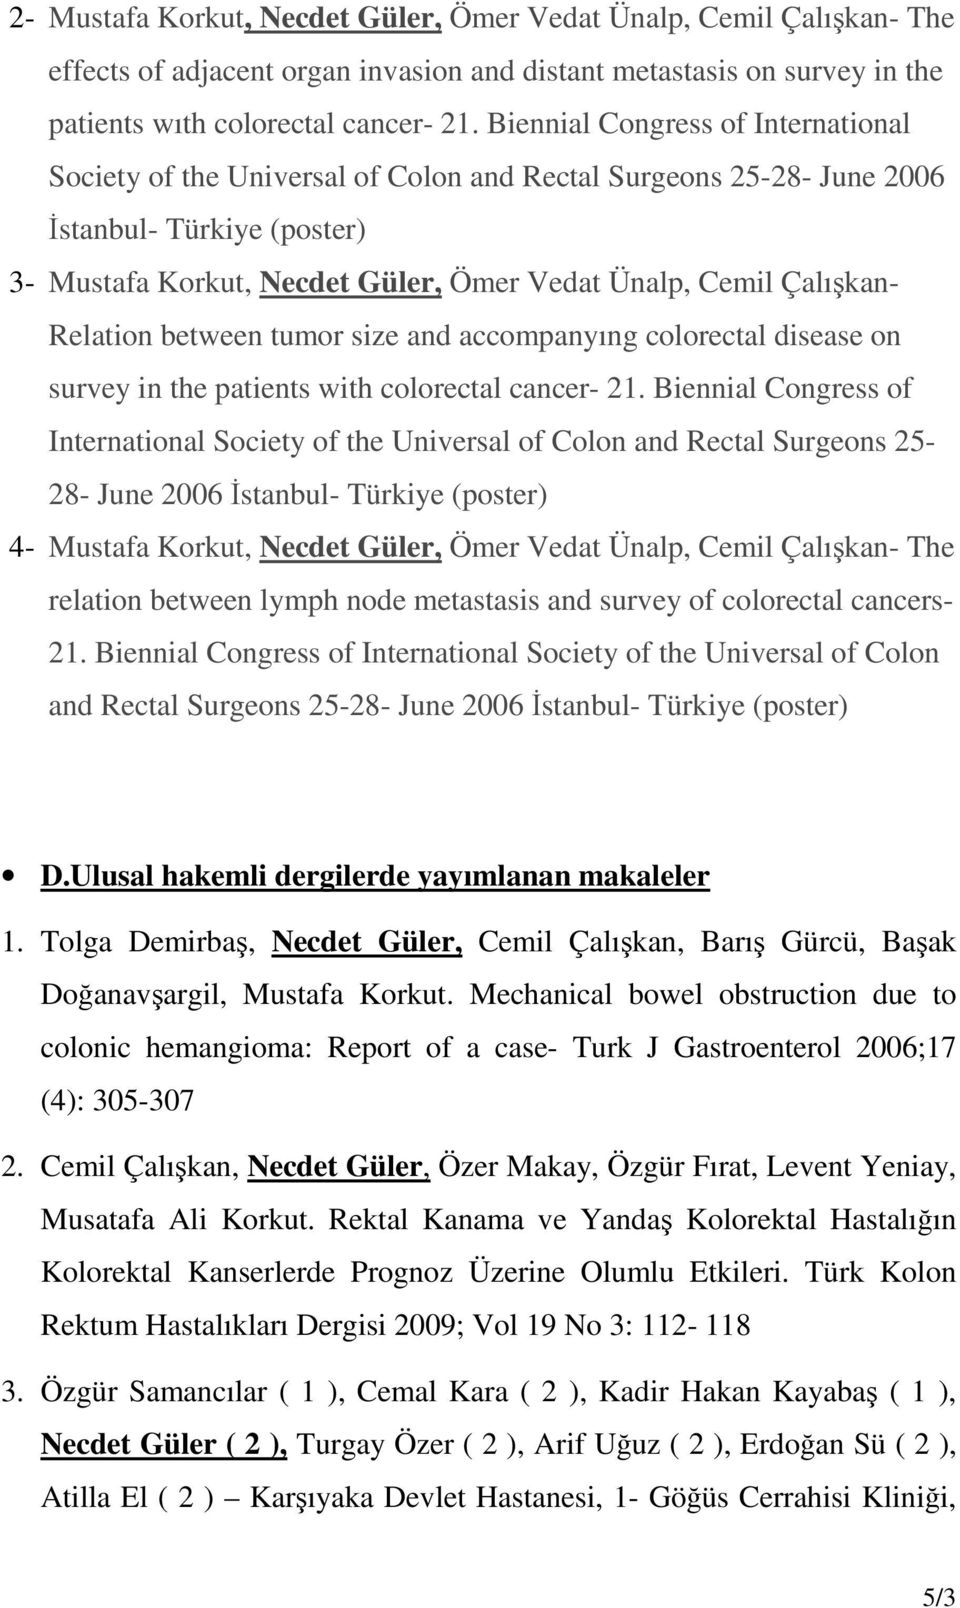 between tumor size and accompanyıng colorectal disease on survey in the patients with colorectal cancer- 21.